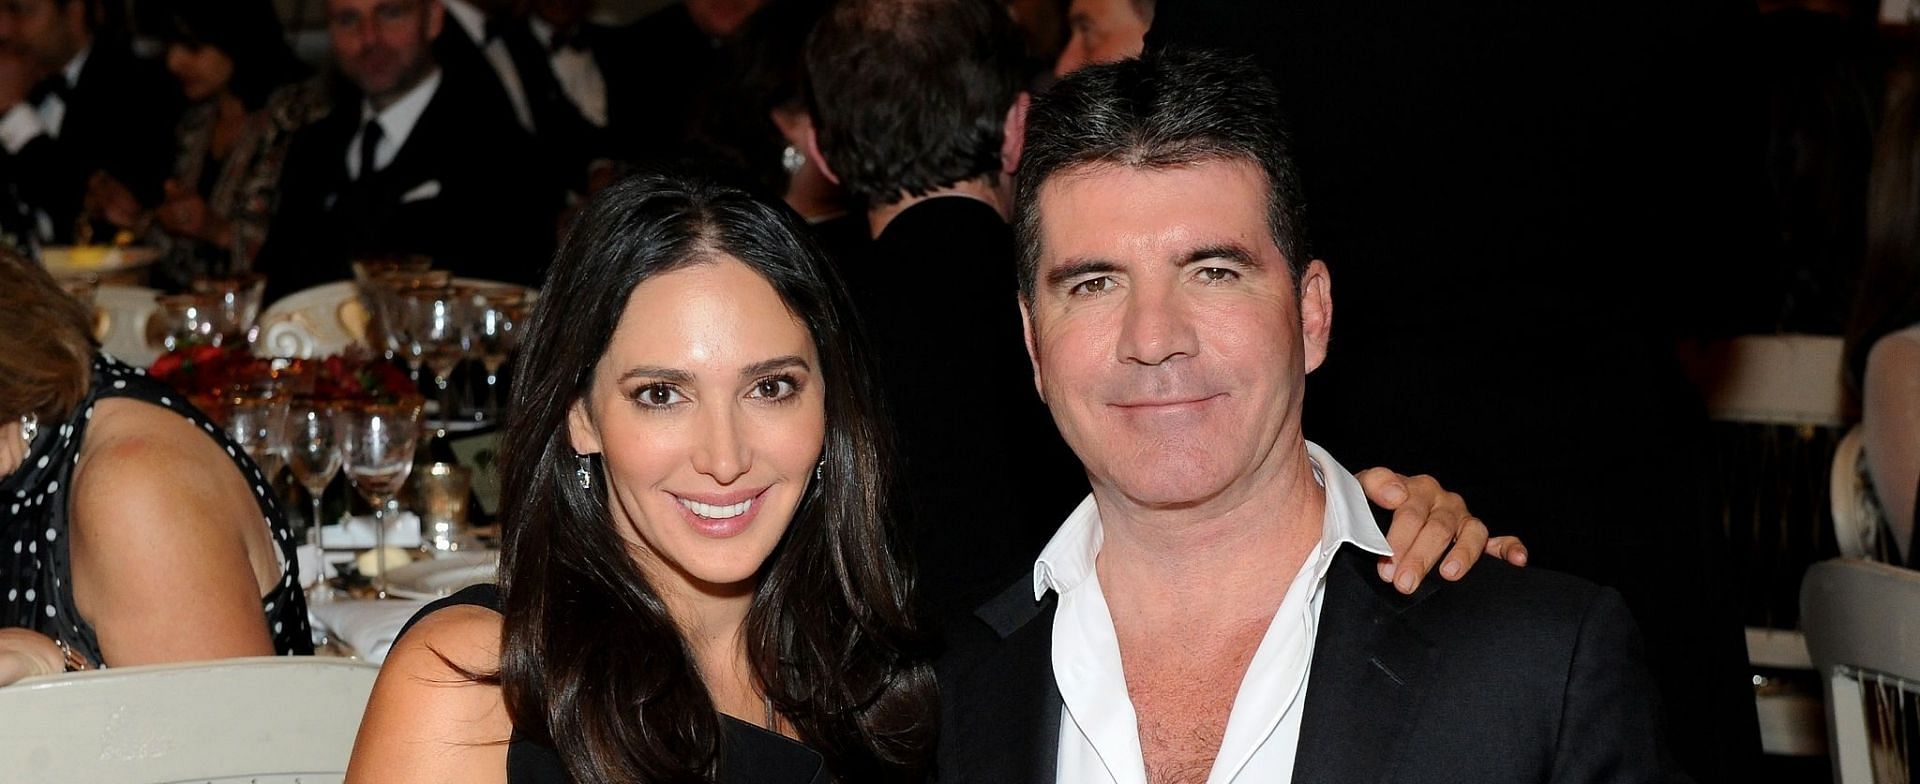 Simon Cowell and Lauren Silverman got engaged on December 24, 2021 (Image via Dave J Hogan/Getty Images)